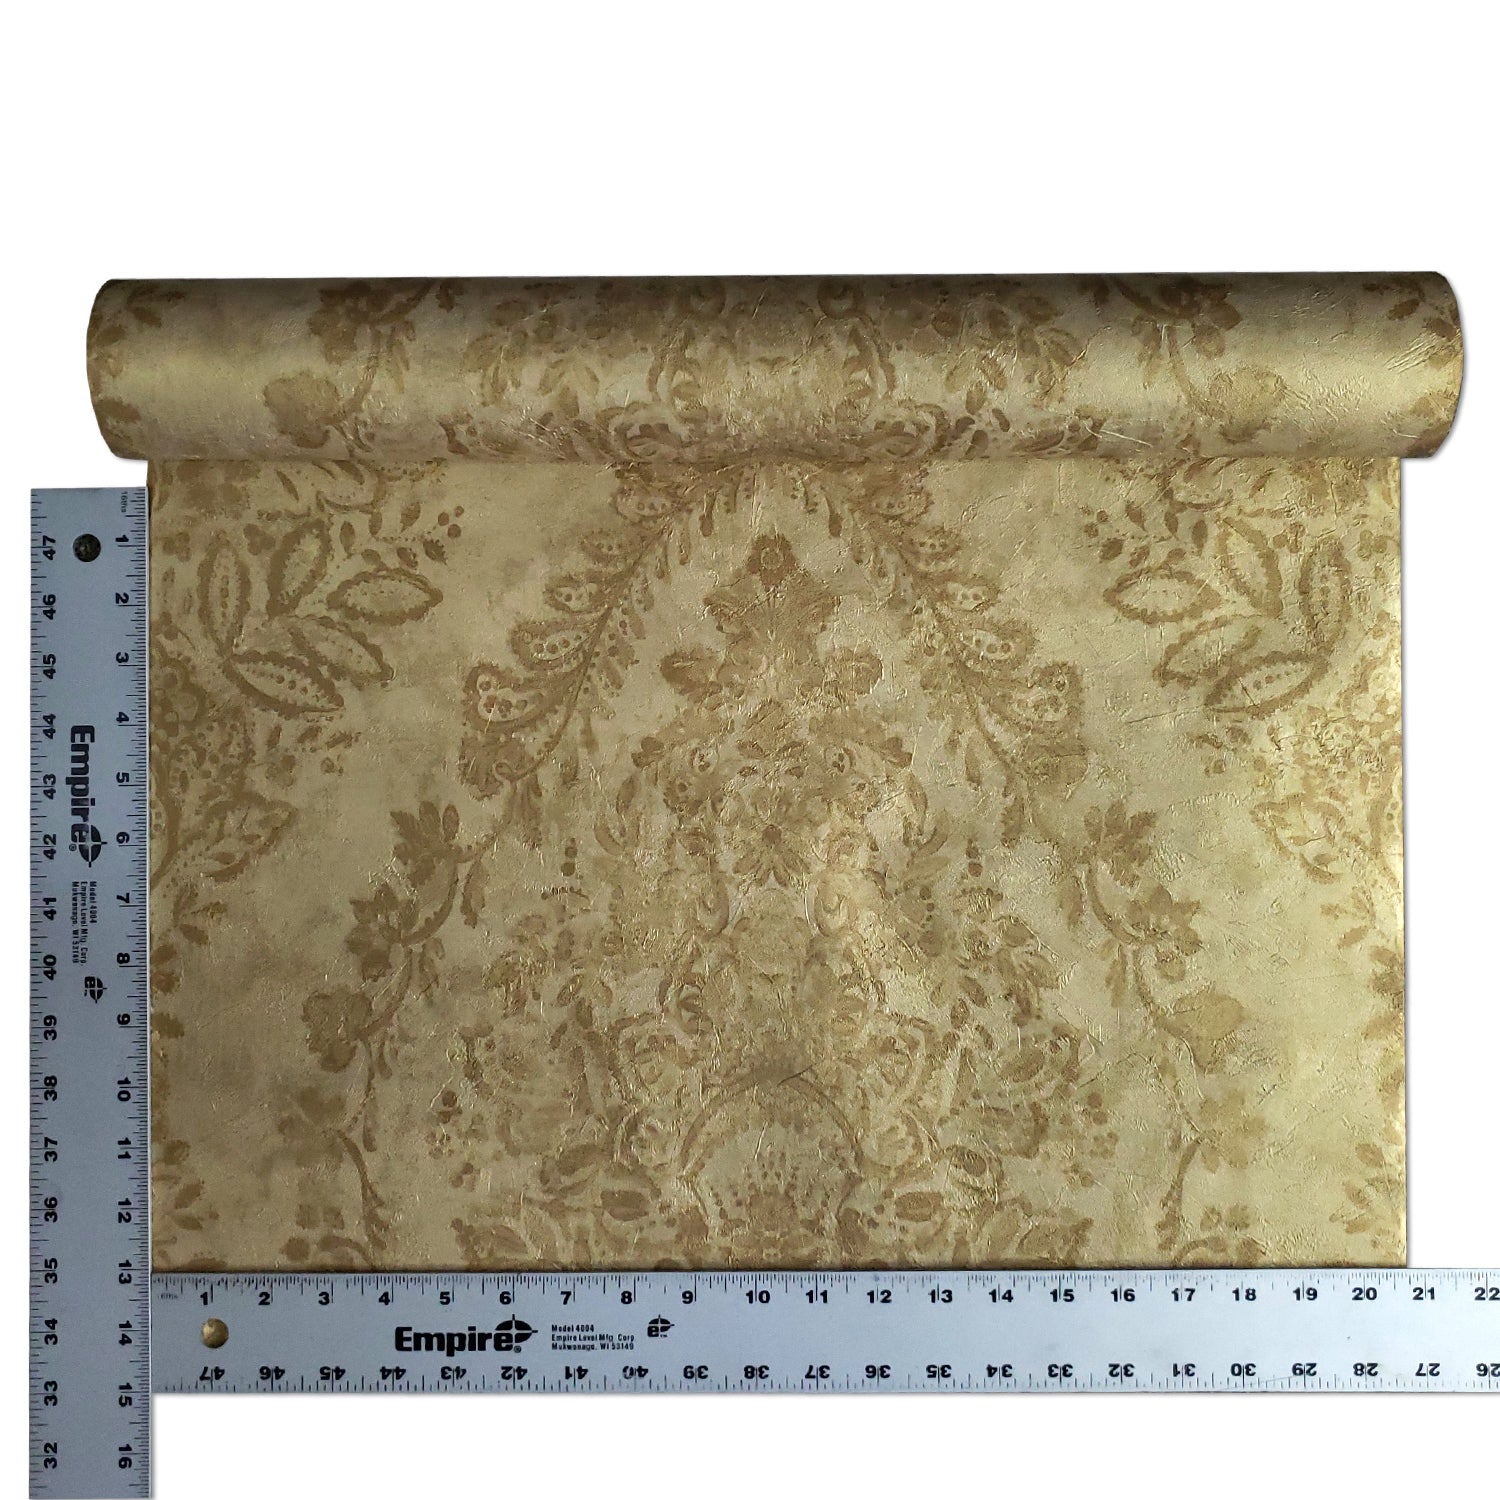 Metallic gold vintage floral damask Wrapping Paper by GogaArt